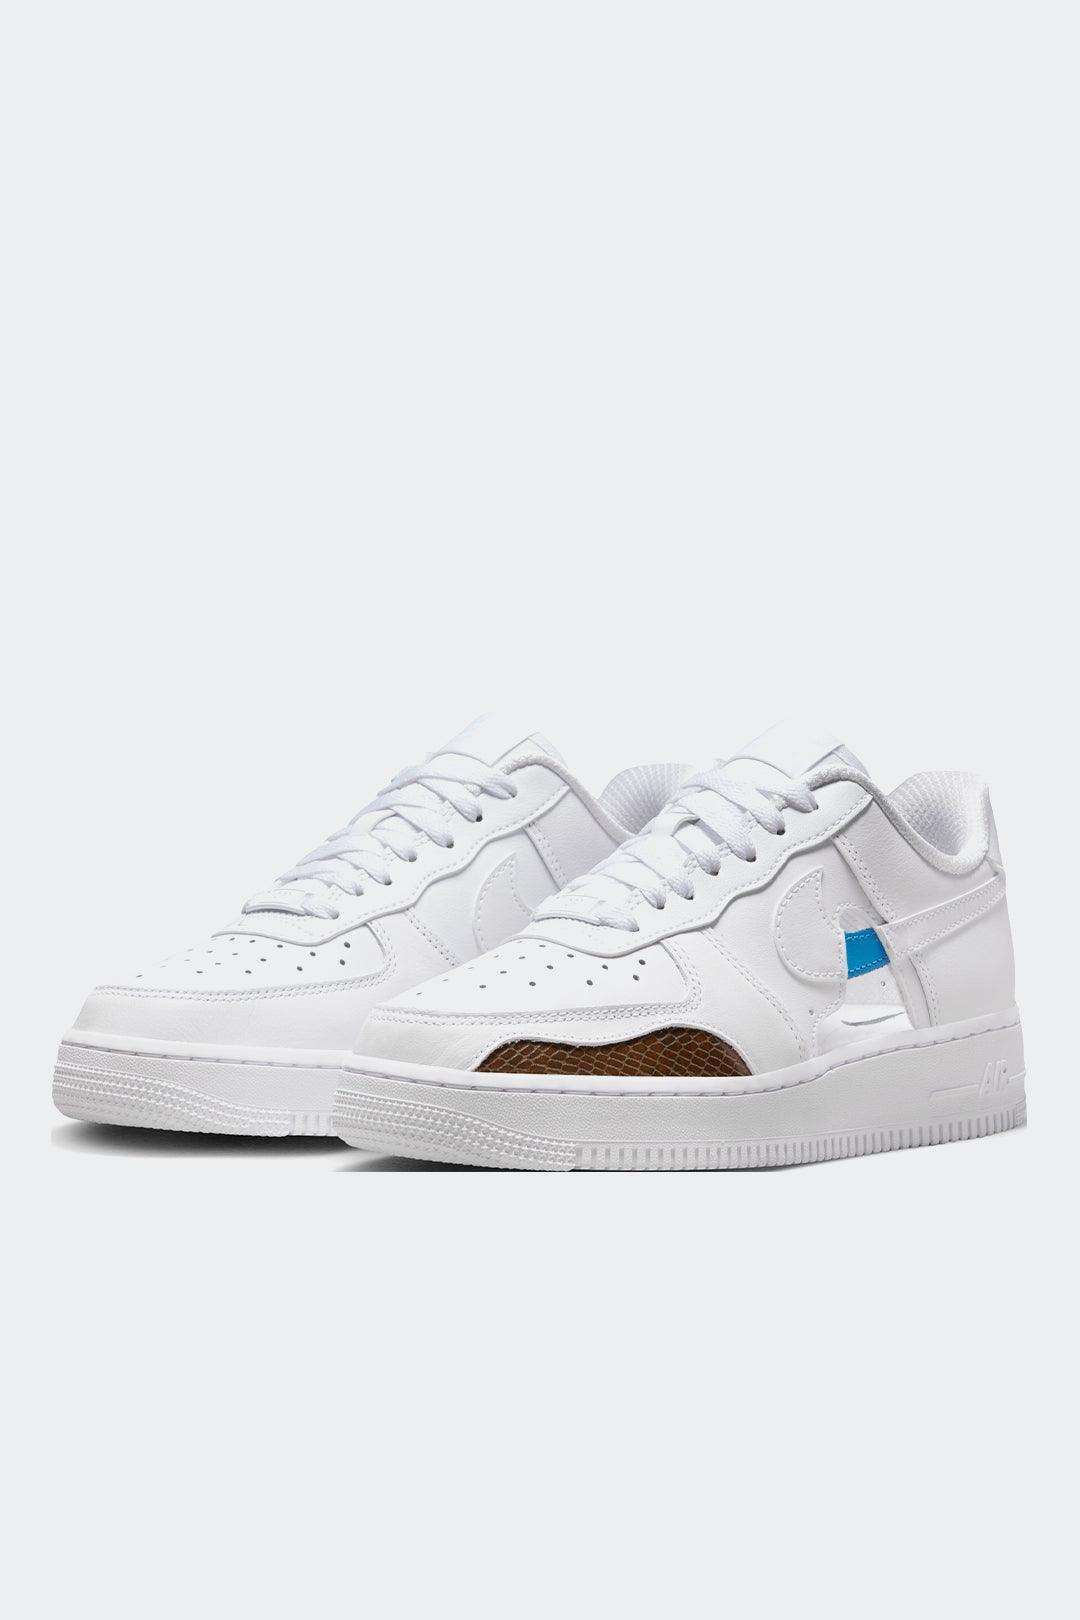 NIKE AIR FORCE 1 LOW "CUT OUT" - MUJER - HYPE